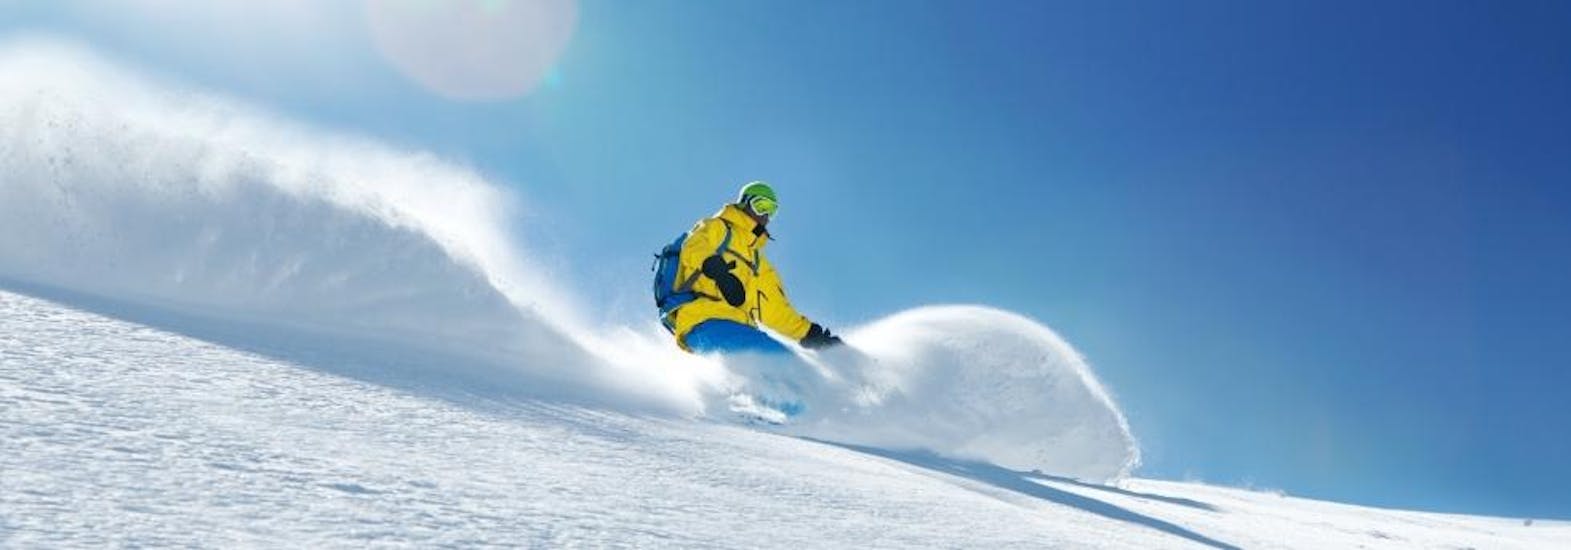 Adult Snowboarding Lessons + Hire Package for All Levels from Skischule Toni Gruber.